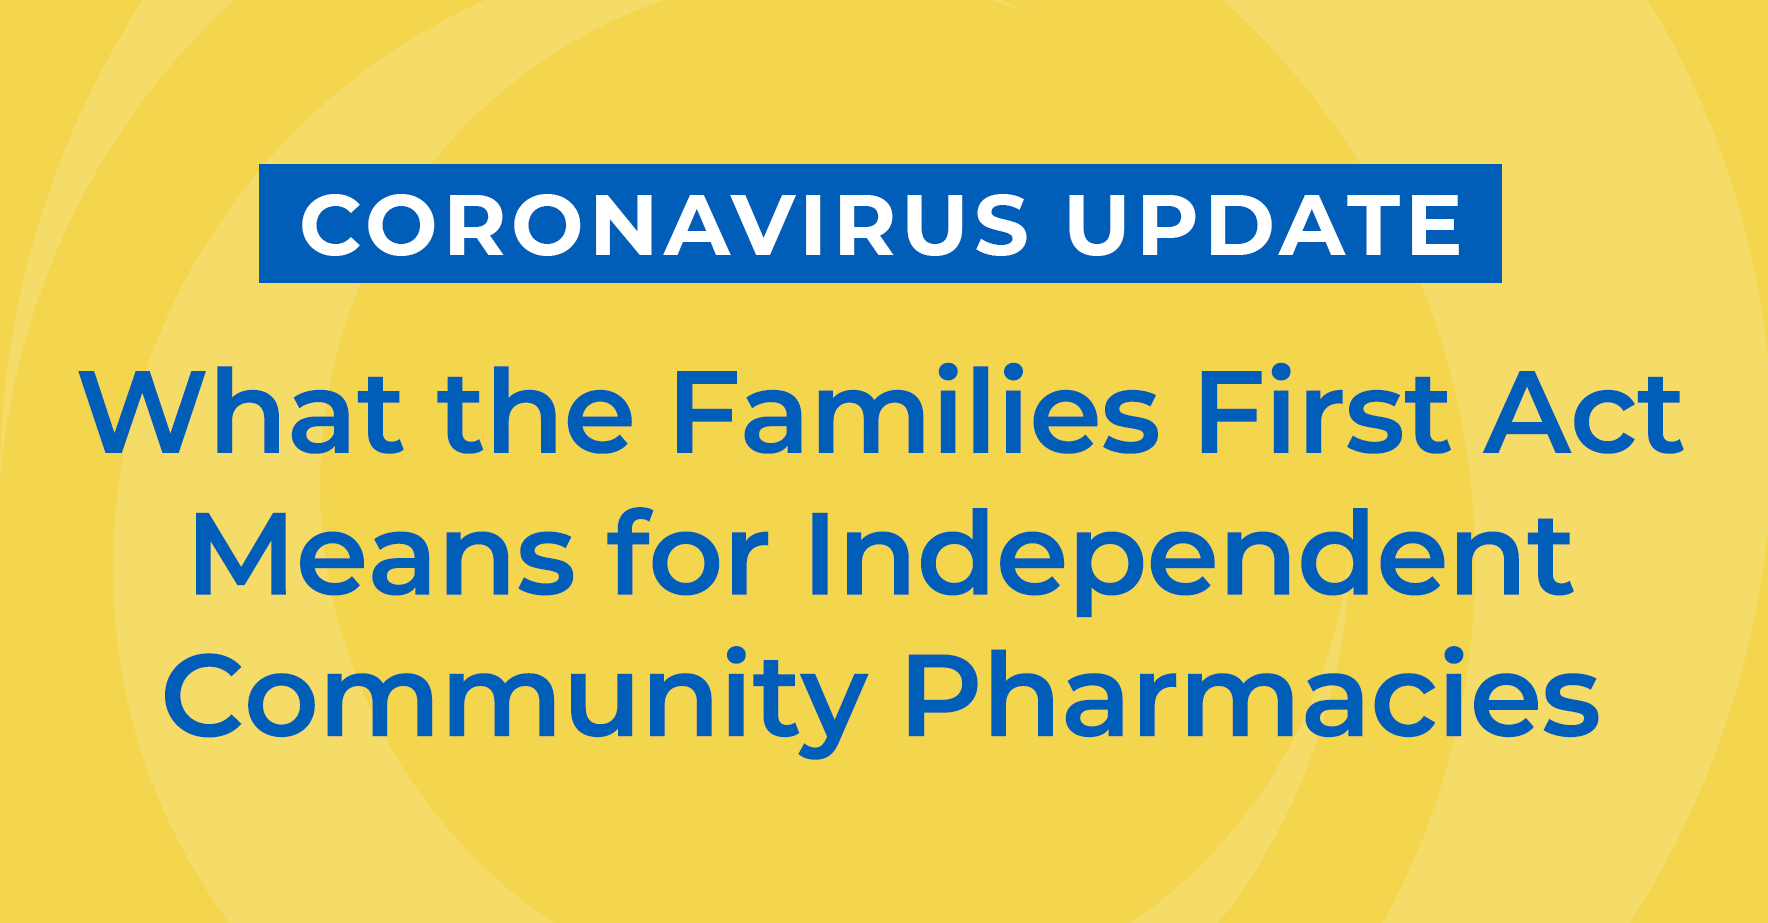 Coronavirus_Update_What_the_Families_First_Act_Means_for_Independent_Community_Pharmacies.png